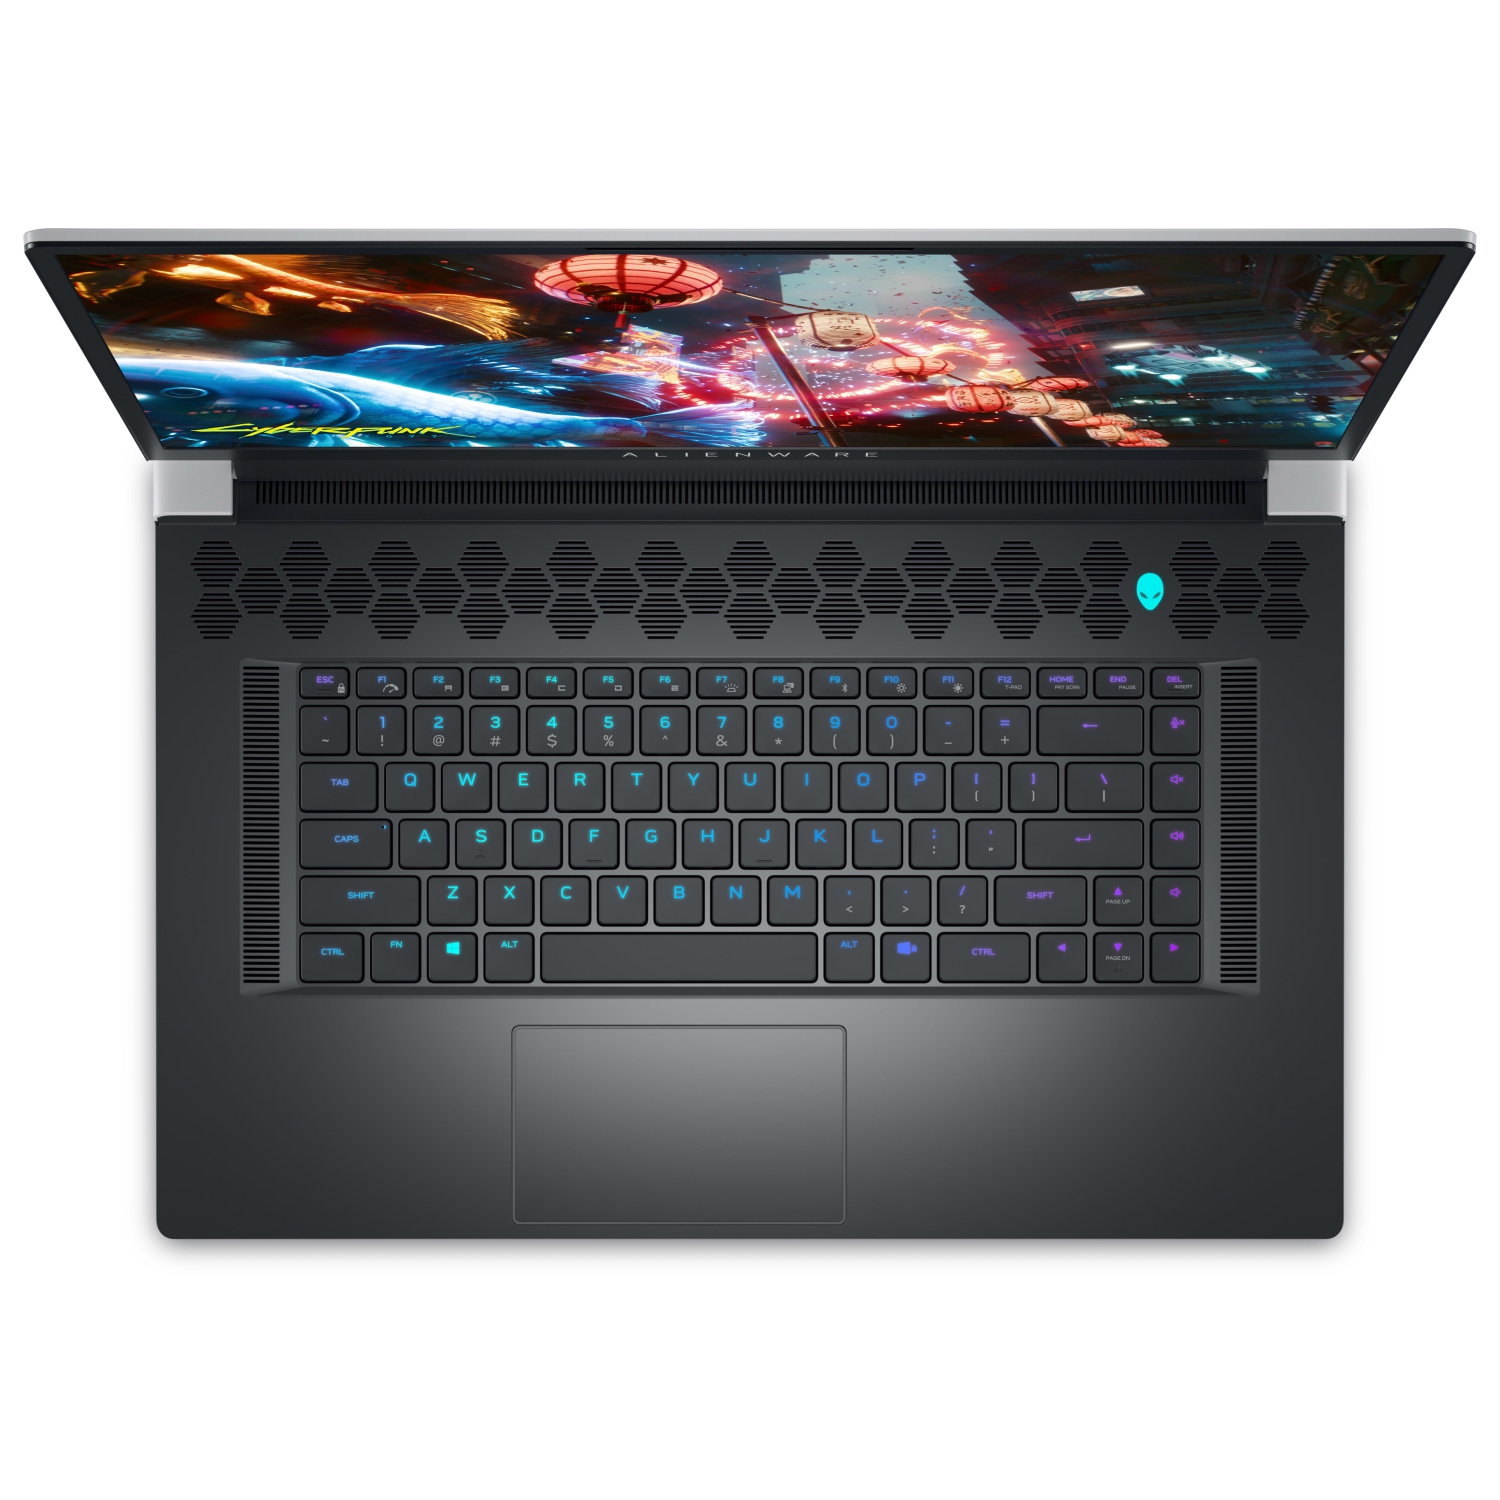 Refurbished (Excellent) – Dell Alienware X17 R2 Gaming Laptop (2022) | 17.3" FHD | Core i7 - 2TB SSD + 2TB SSD - 32GB RAM - RTX 3060 | 14 Cores @ 4.7 GHz - 12th Gen CPU - 6GB GDDR6